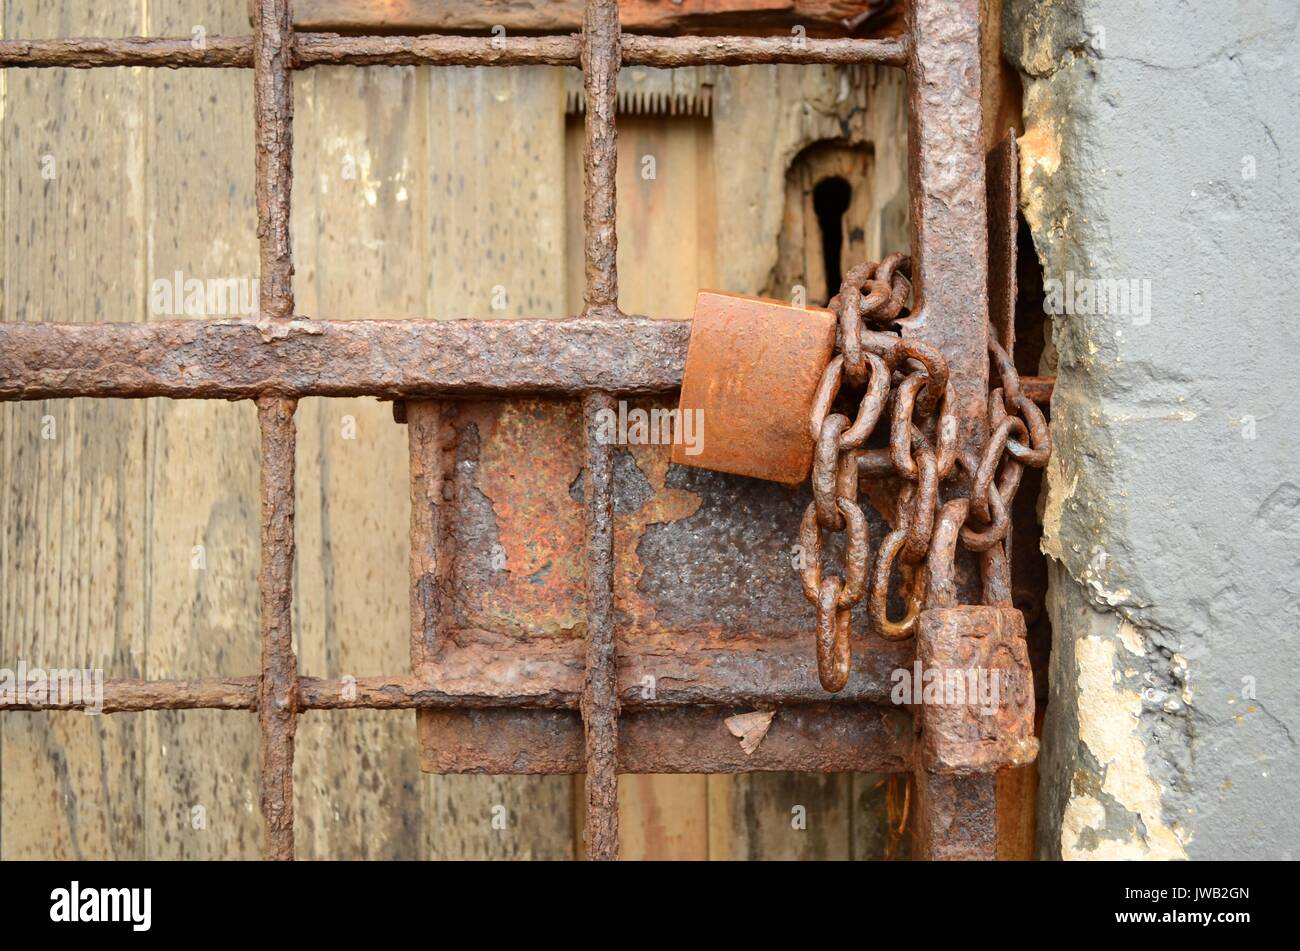 Close up of rusty padlocks and chain on rusted security gate, closing off old wooden door with key hole and showing part of wall painted light grey. Stock Photo